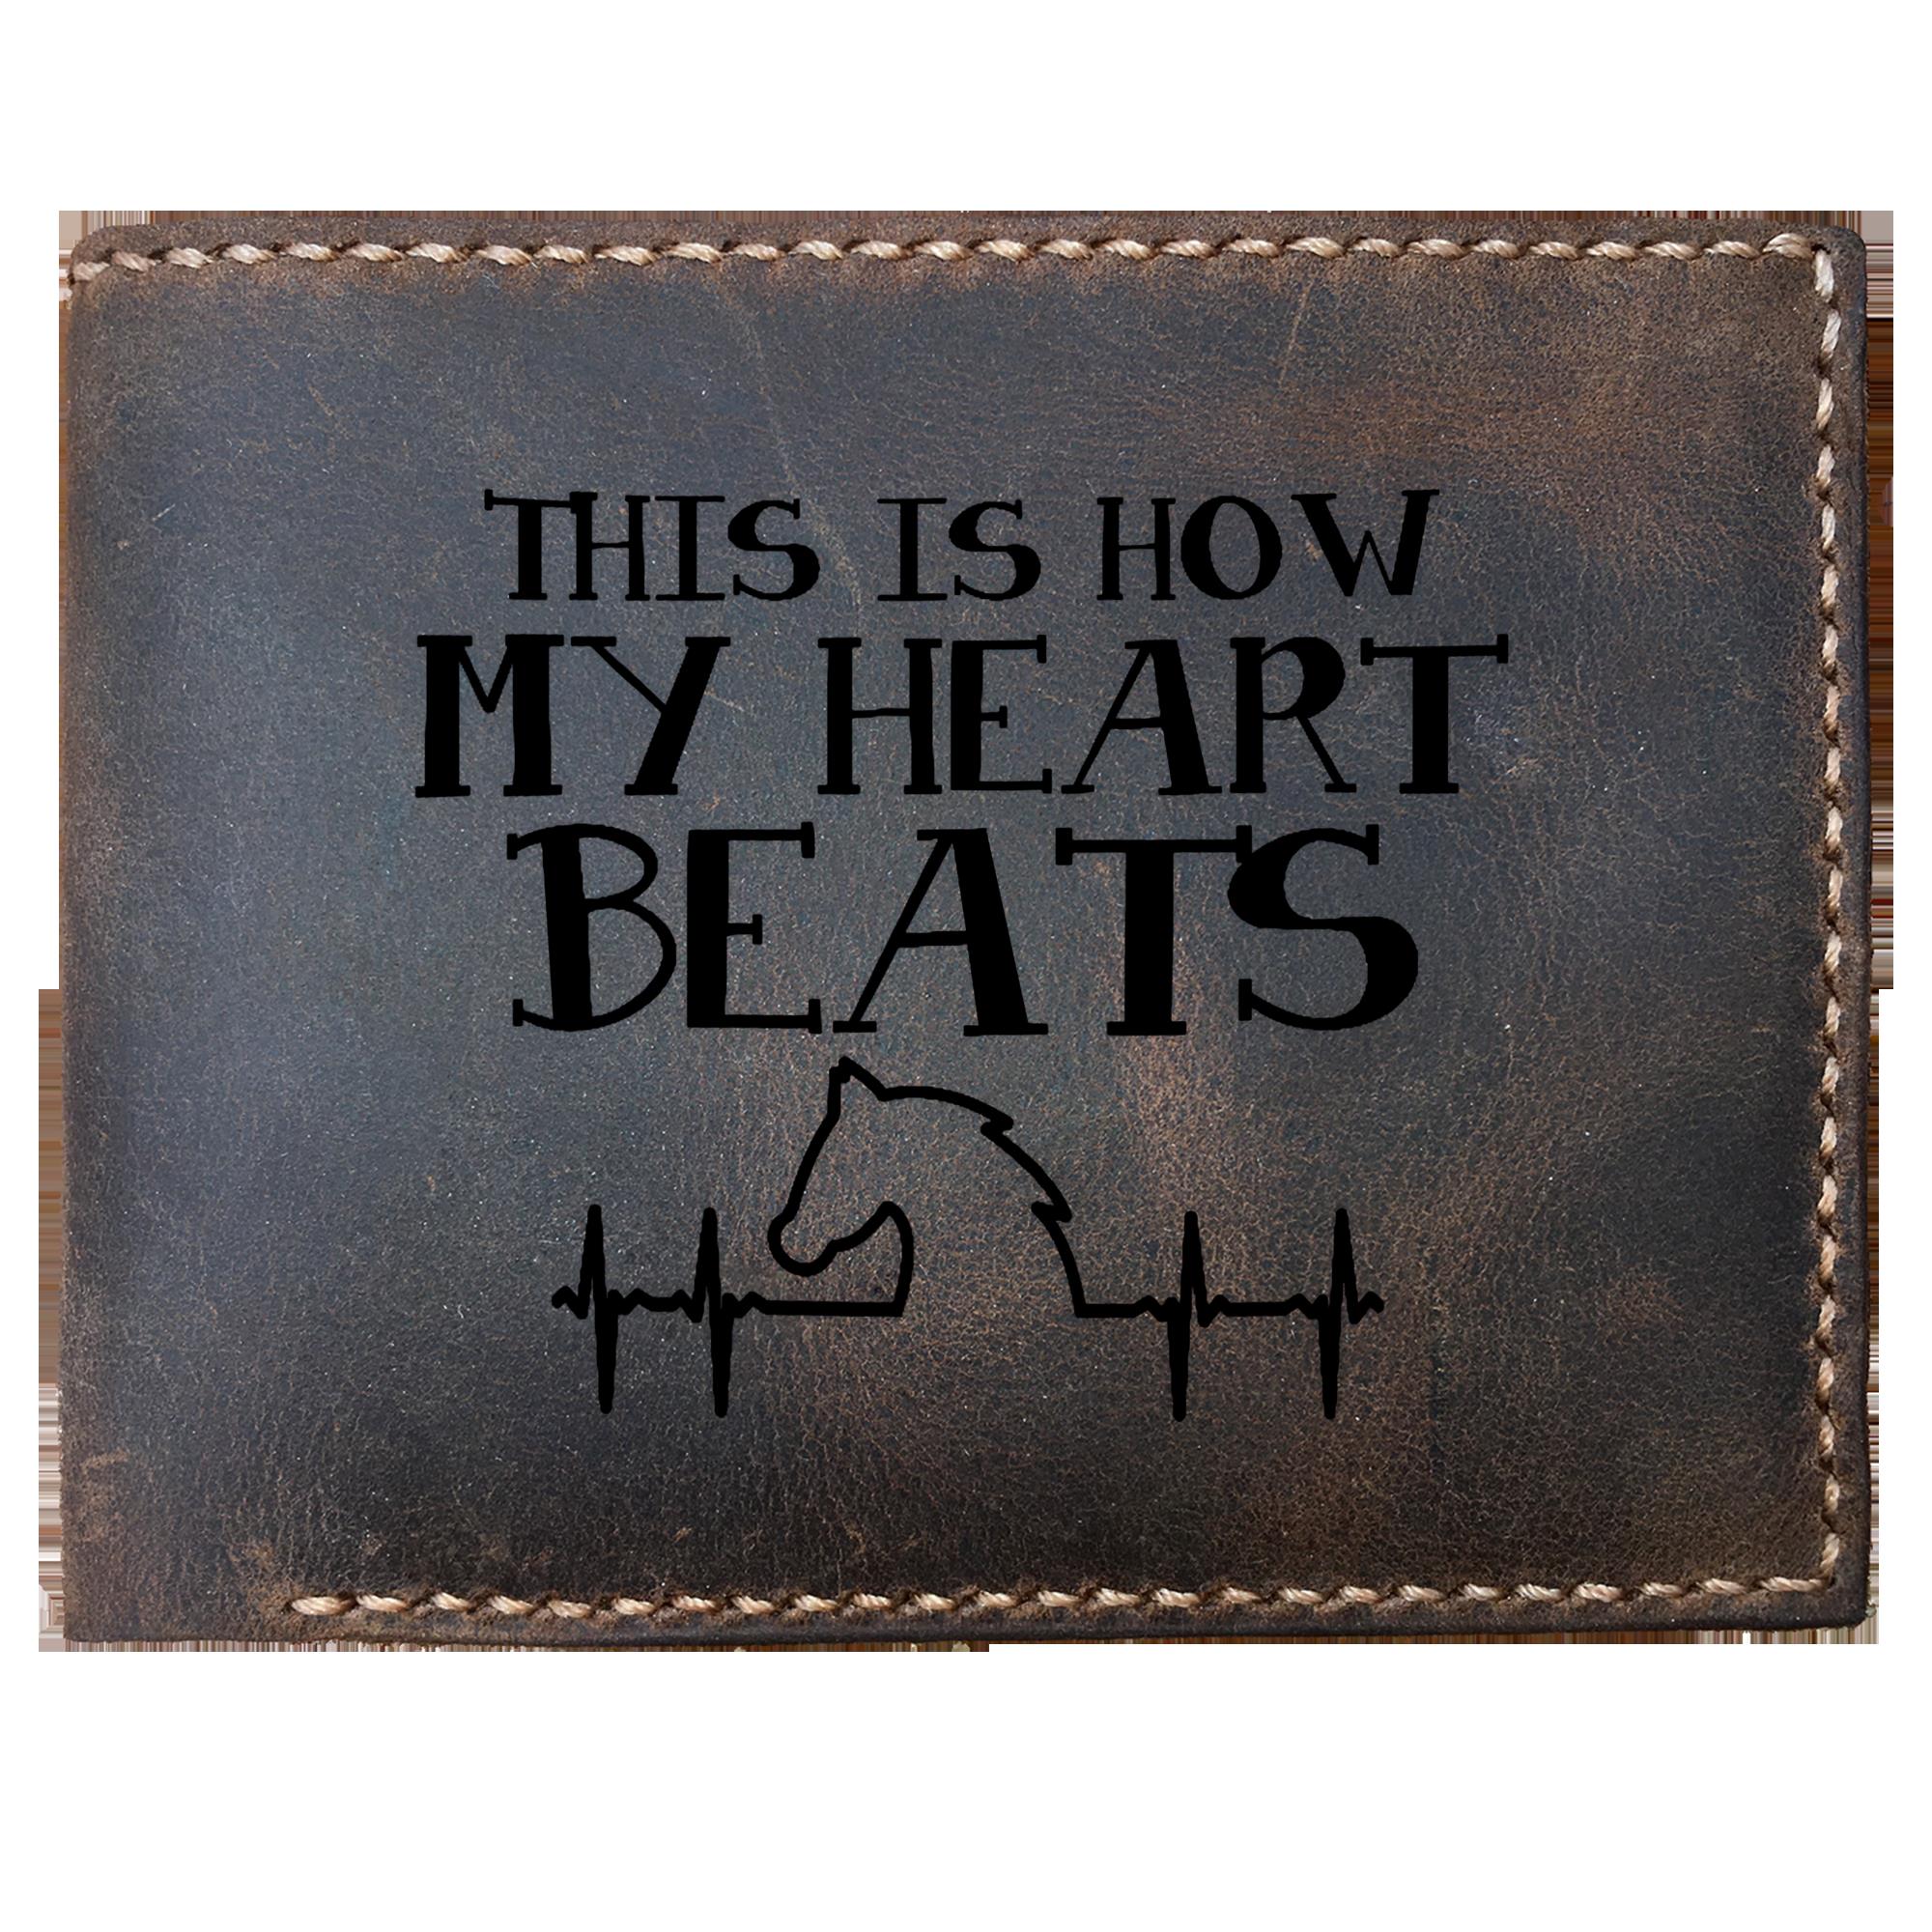 Skitongifts Funny Custom Laser Engraved Bifold Leather Wallet For Men, This Is How My Heart Beats